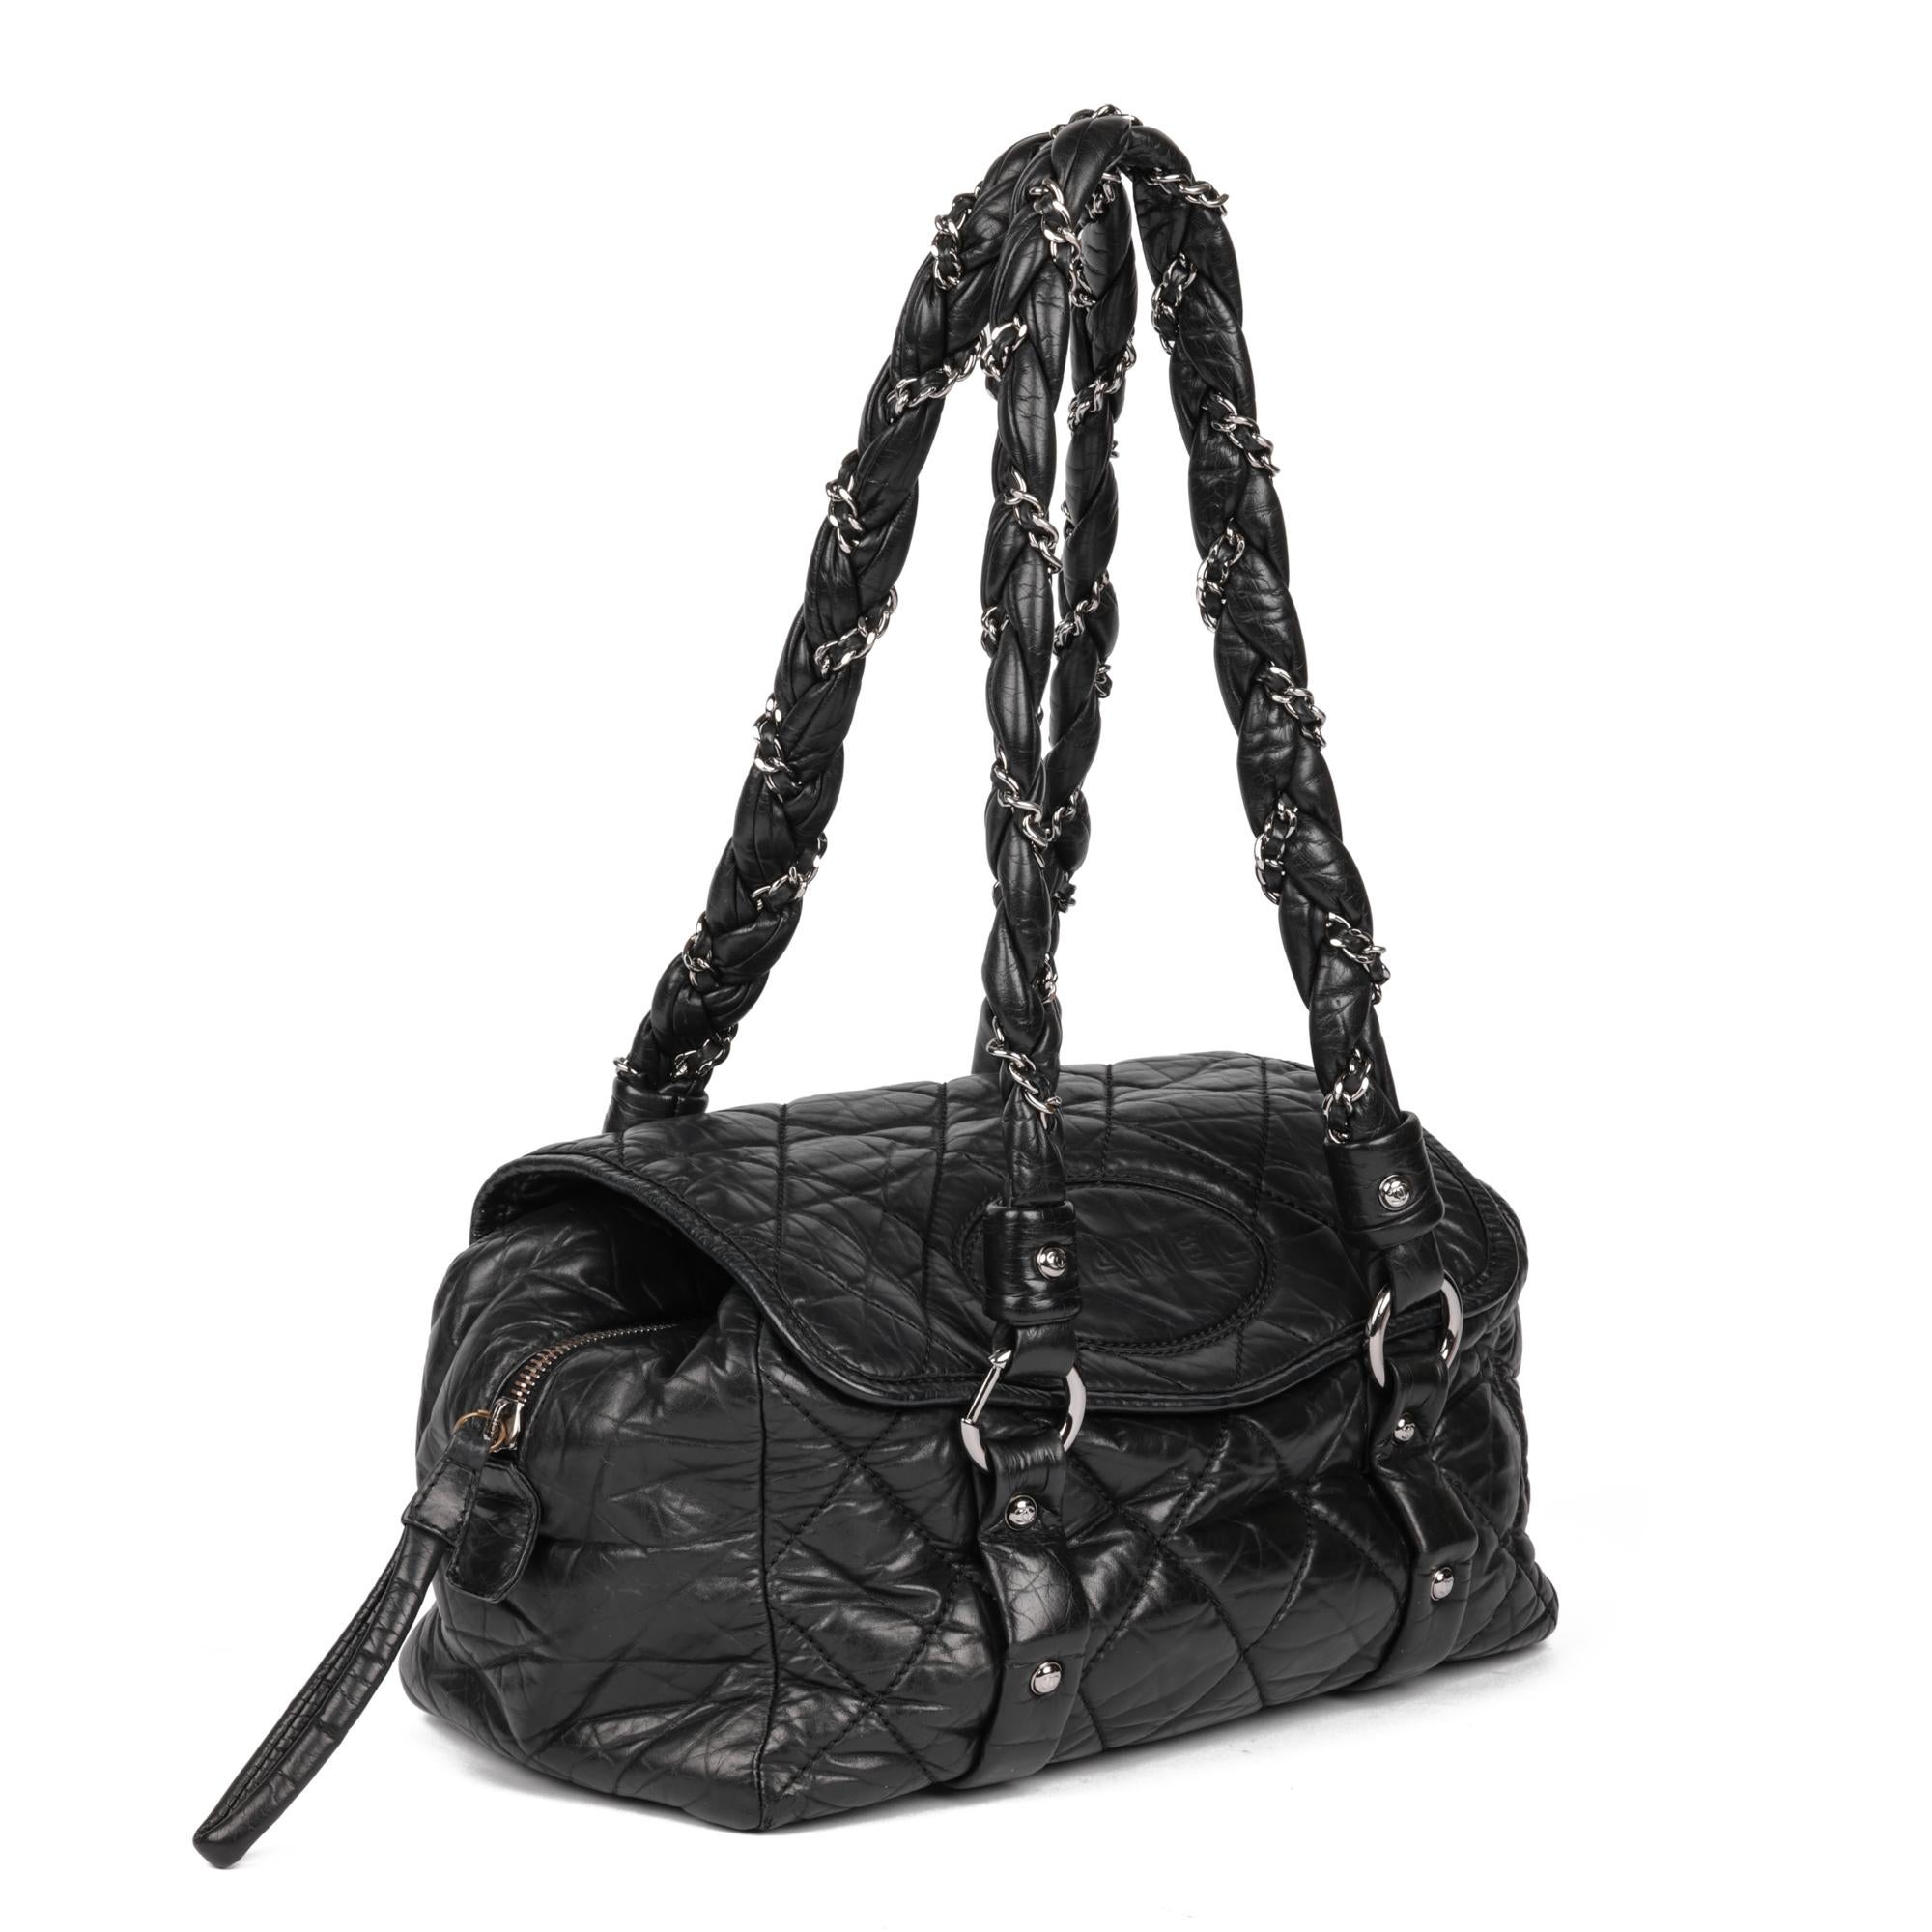 CHANEL
Black Lambskin Lady Braid Flap Tote 

Xupes Reference: CB862
Serial Number: 10779215
Age (Circa): 2008
Accompanied By: Chanel Dust Bag 
Authenticity Details: Serial Sticker (Made in France)
Gender: Ladies
Type: Tote, Shoulder

Colour: